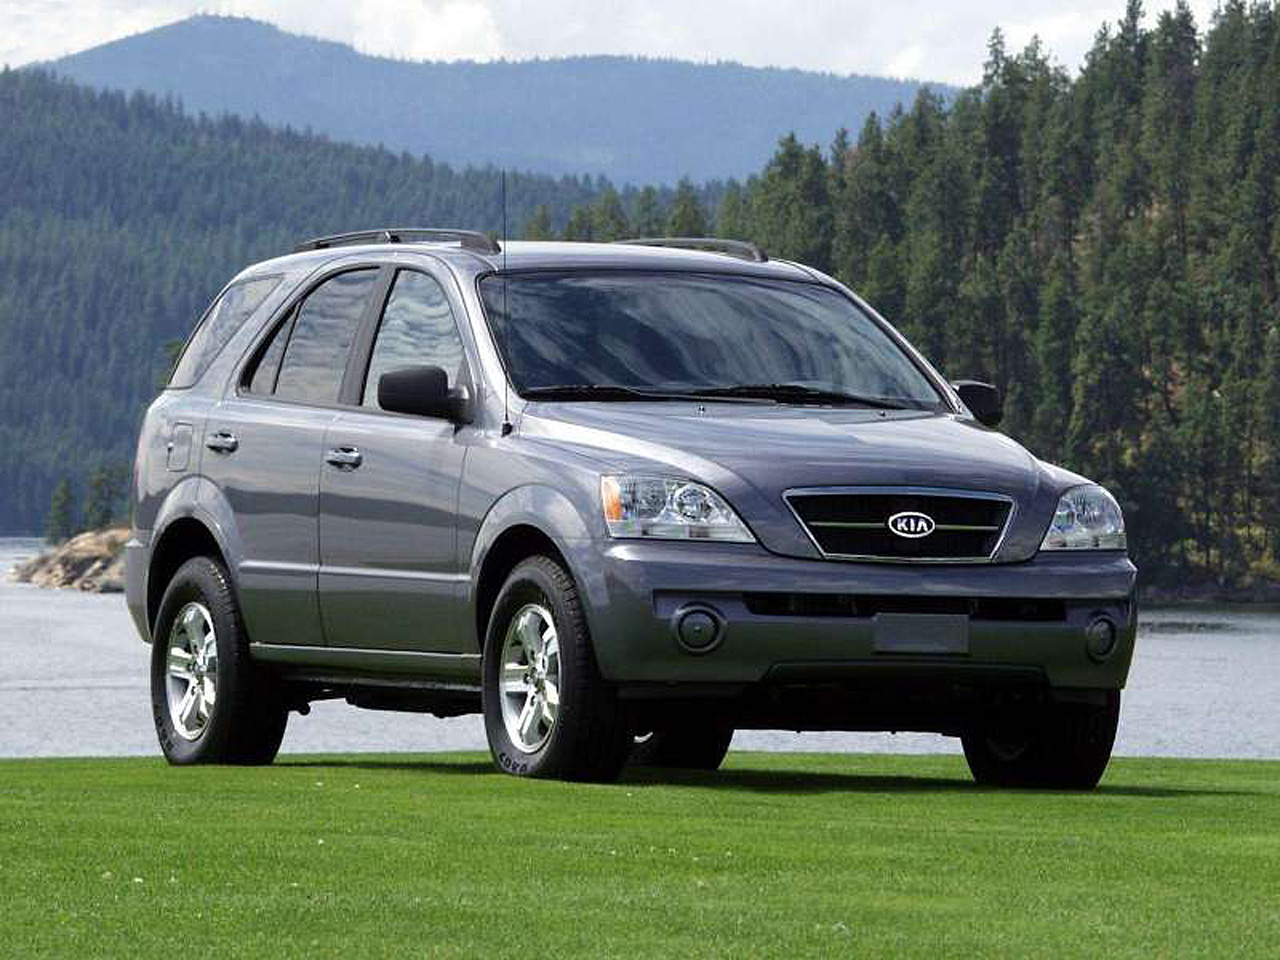 Kia Sorento 2000 Review, Amazing Pictures and Images